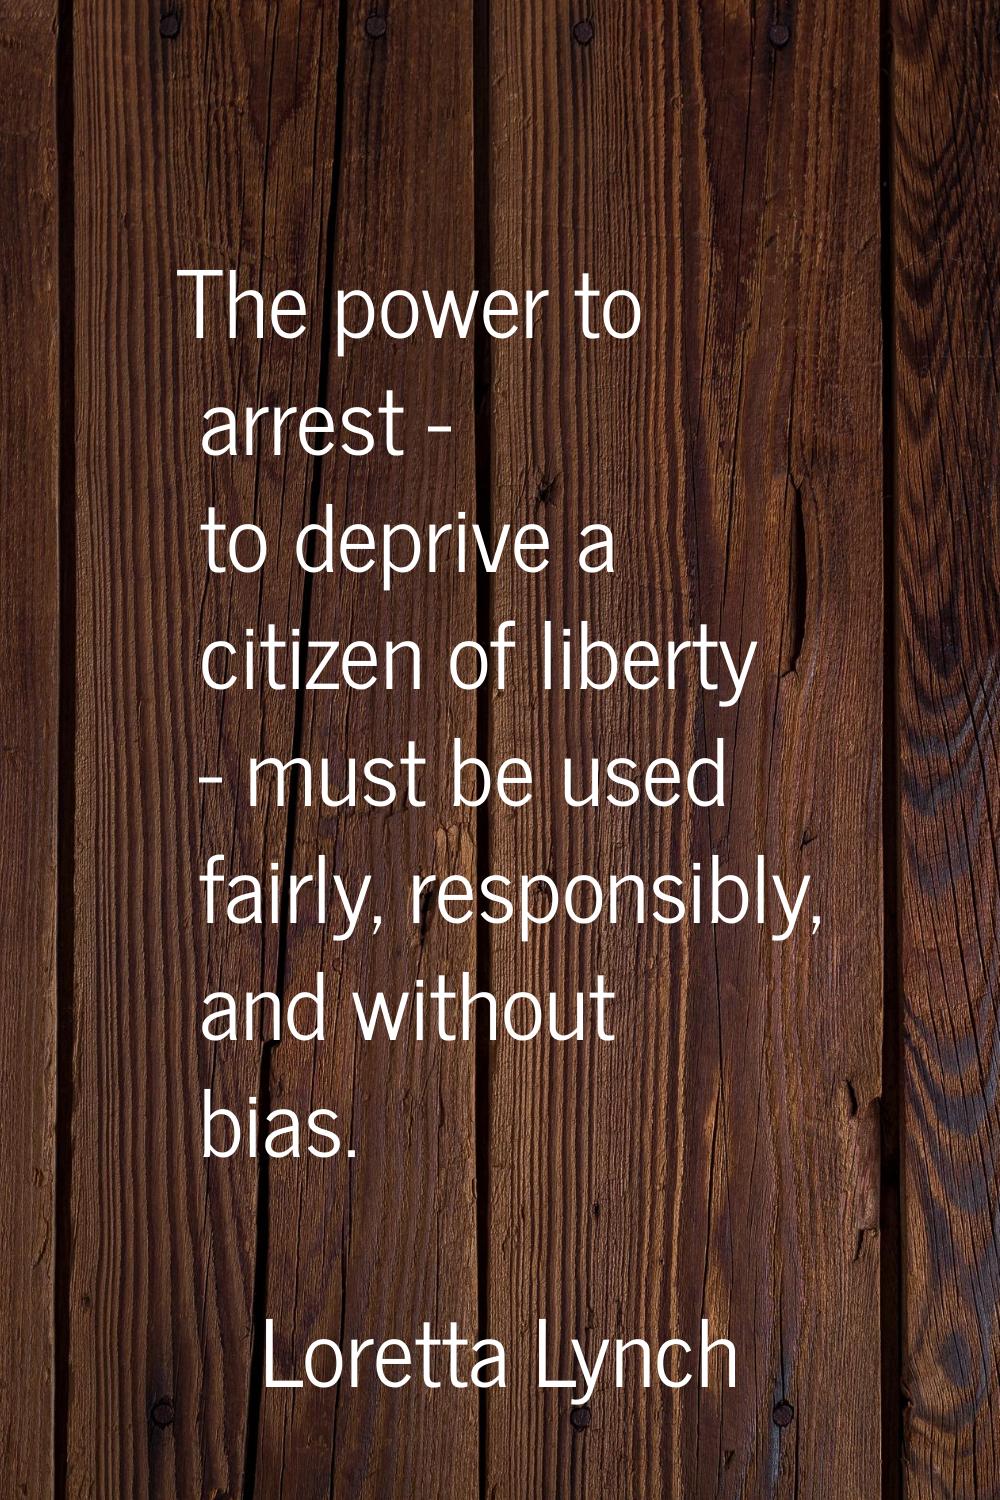 The power to arrest - to deprive a citizen of liberty - must be used fairly, responsibly, and witho